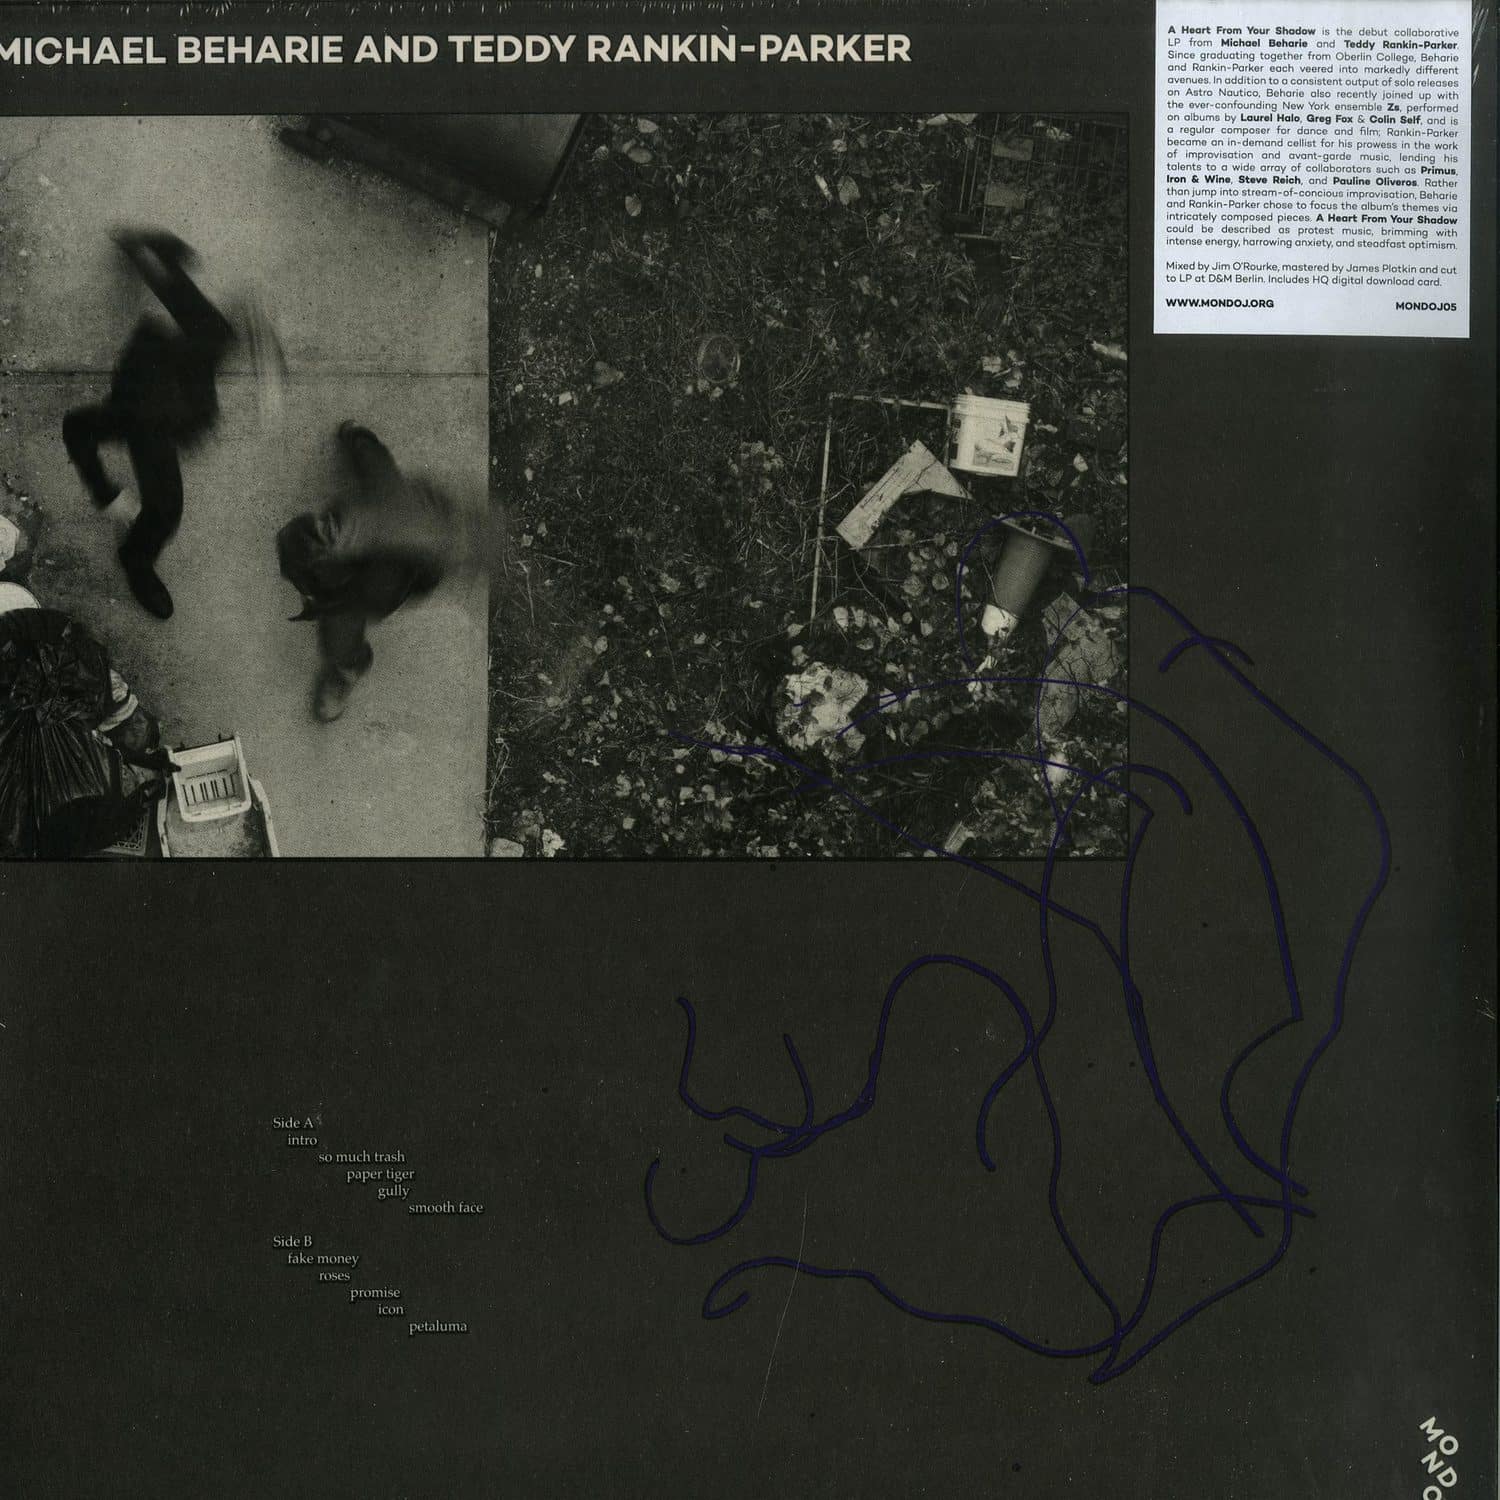 Michael Beharie And Teddy Rankin-parker - HEART FROM YOUR SHADOW 